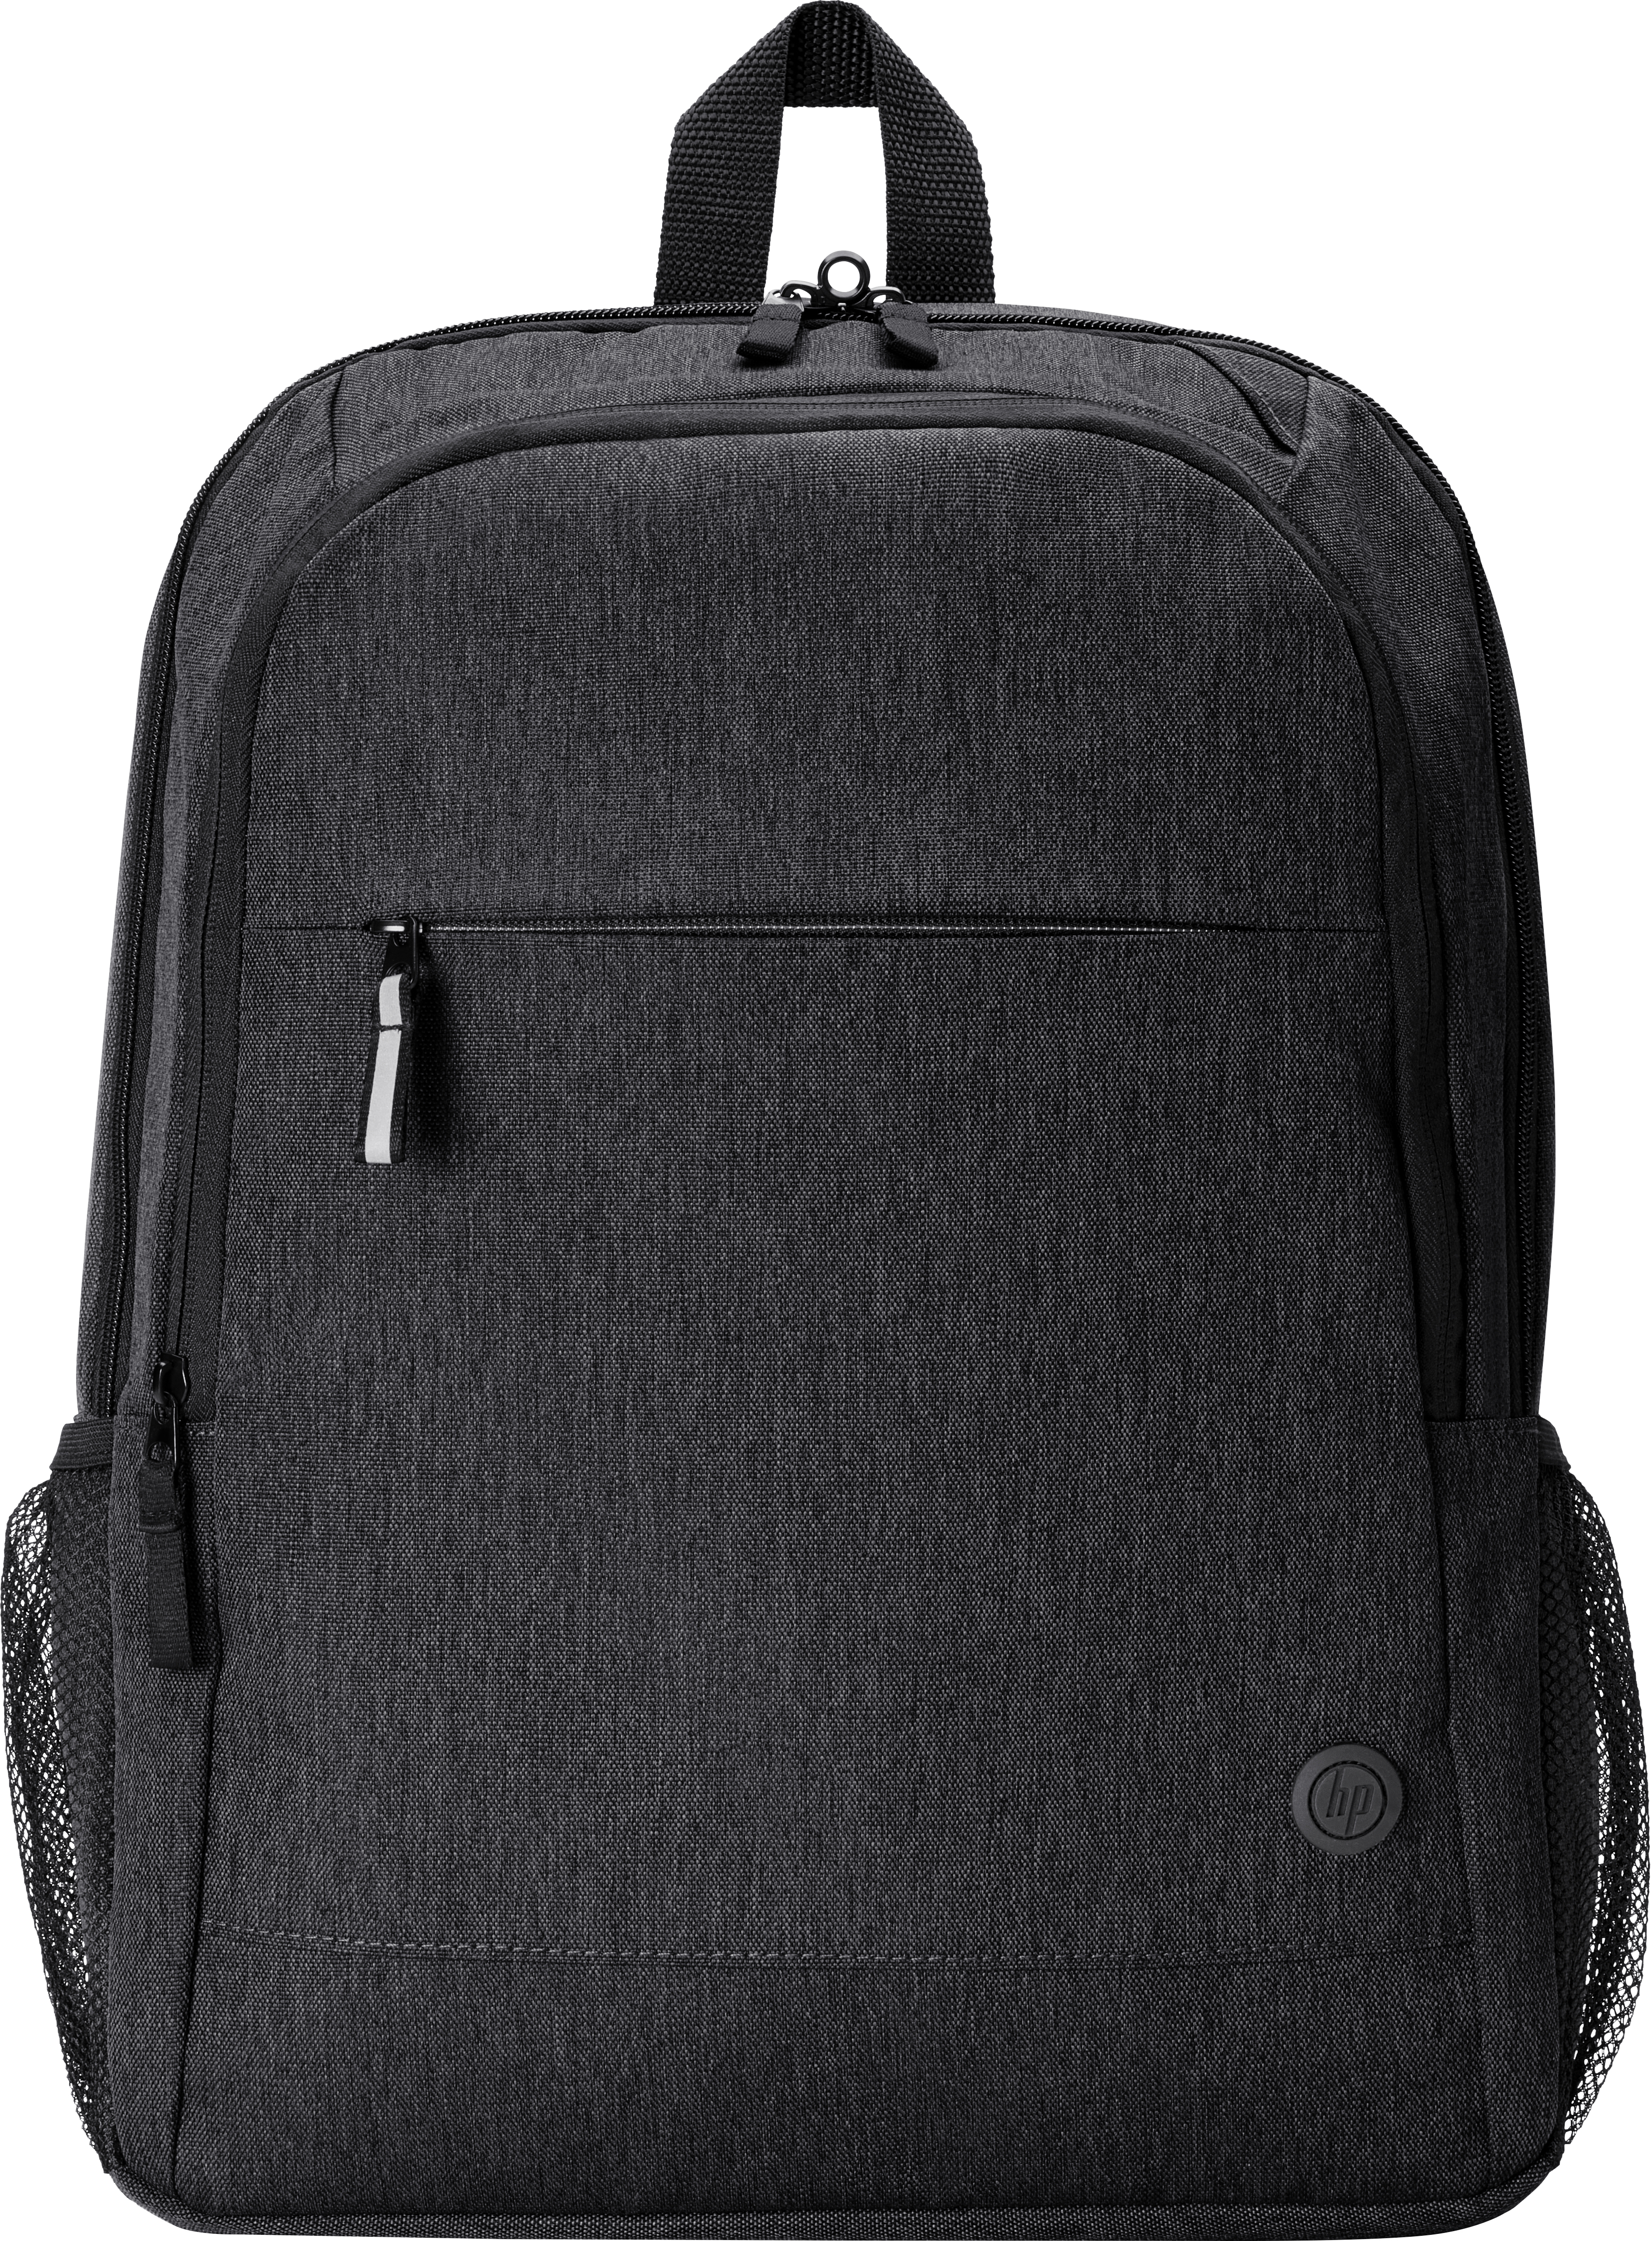 Hp - Comm Mobile Accessories (mp Hp Prelude Pro 15.6 Backpack        .                                   1x644aa